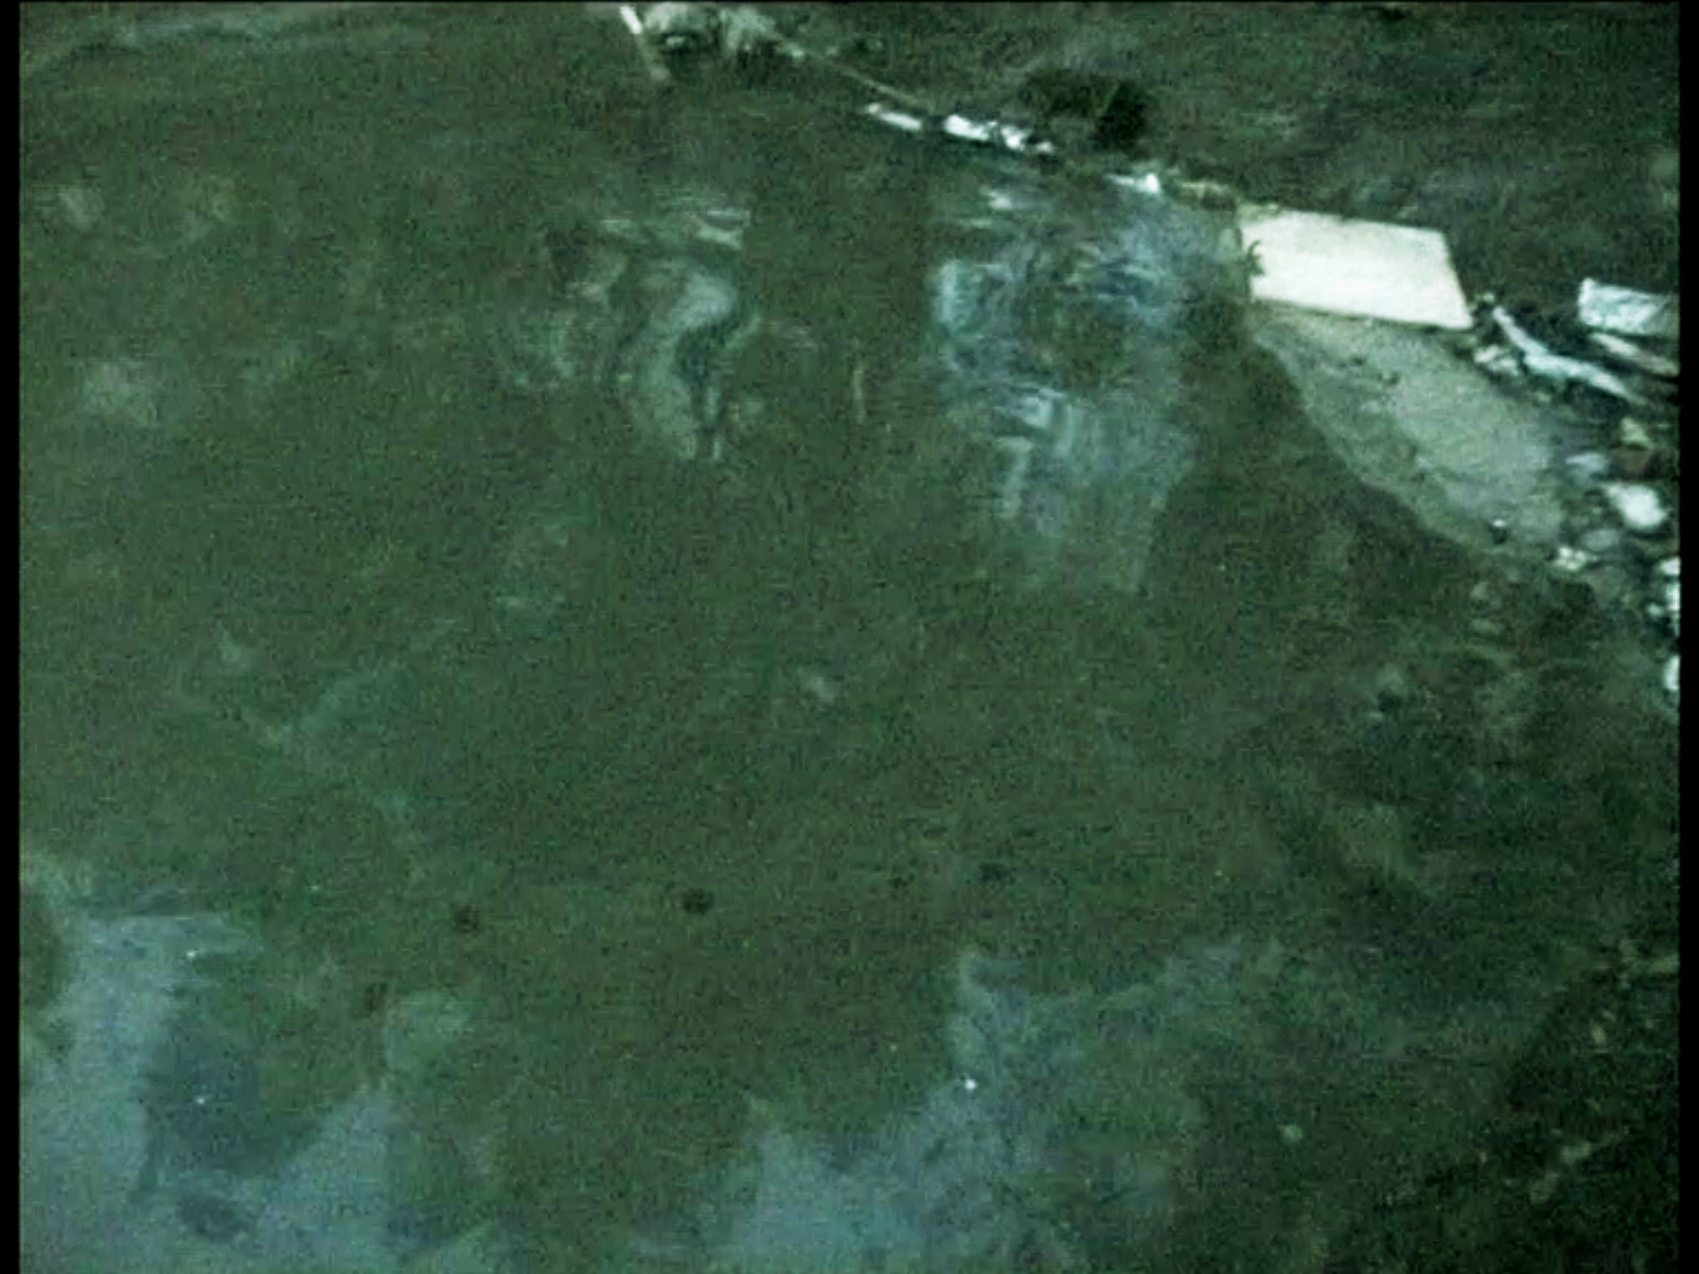 Peng Yu, Exile, 2000. Video still. Collection of M HKA /Museum of Contemporary Art, Antwerp.